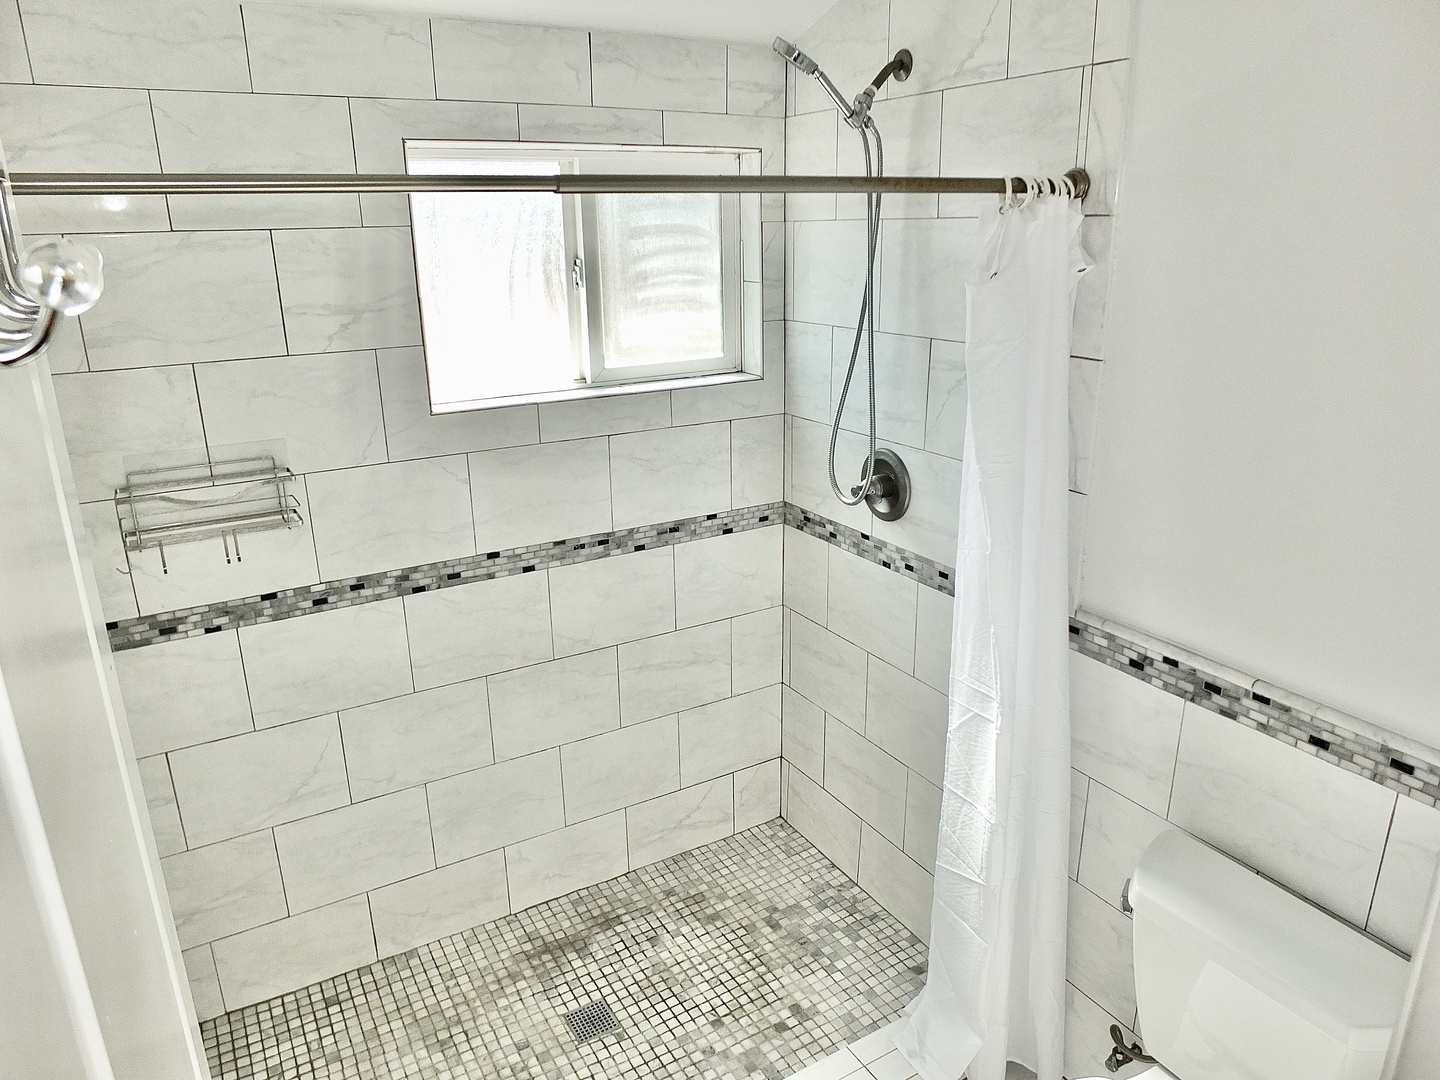 The king ensuite includes a single vanity & walk-in shower